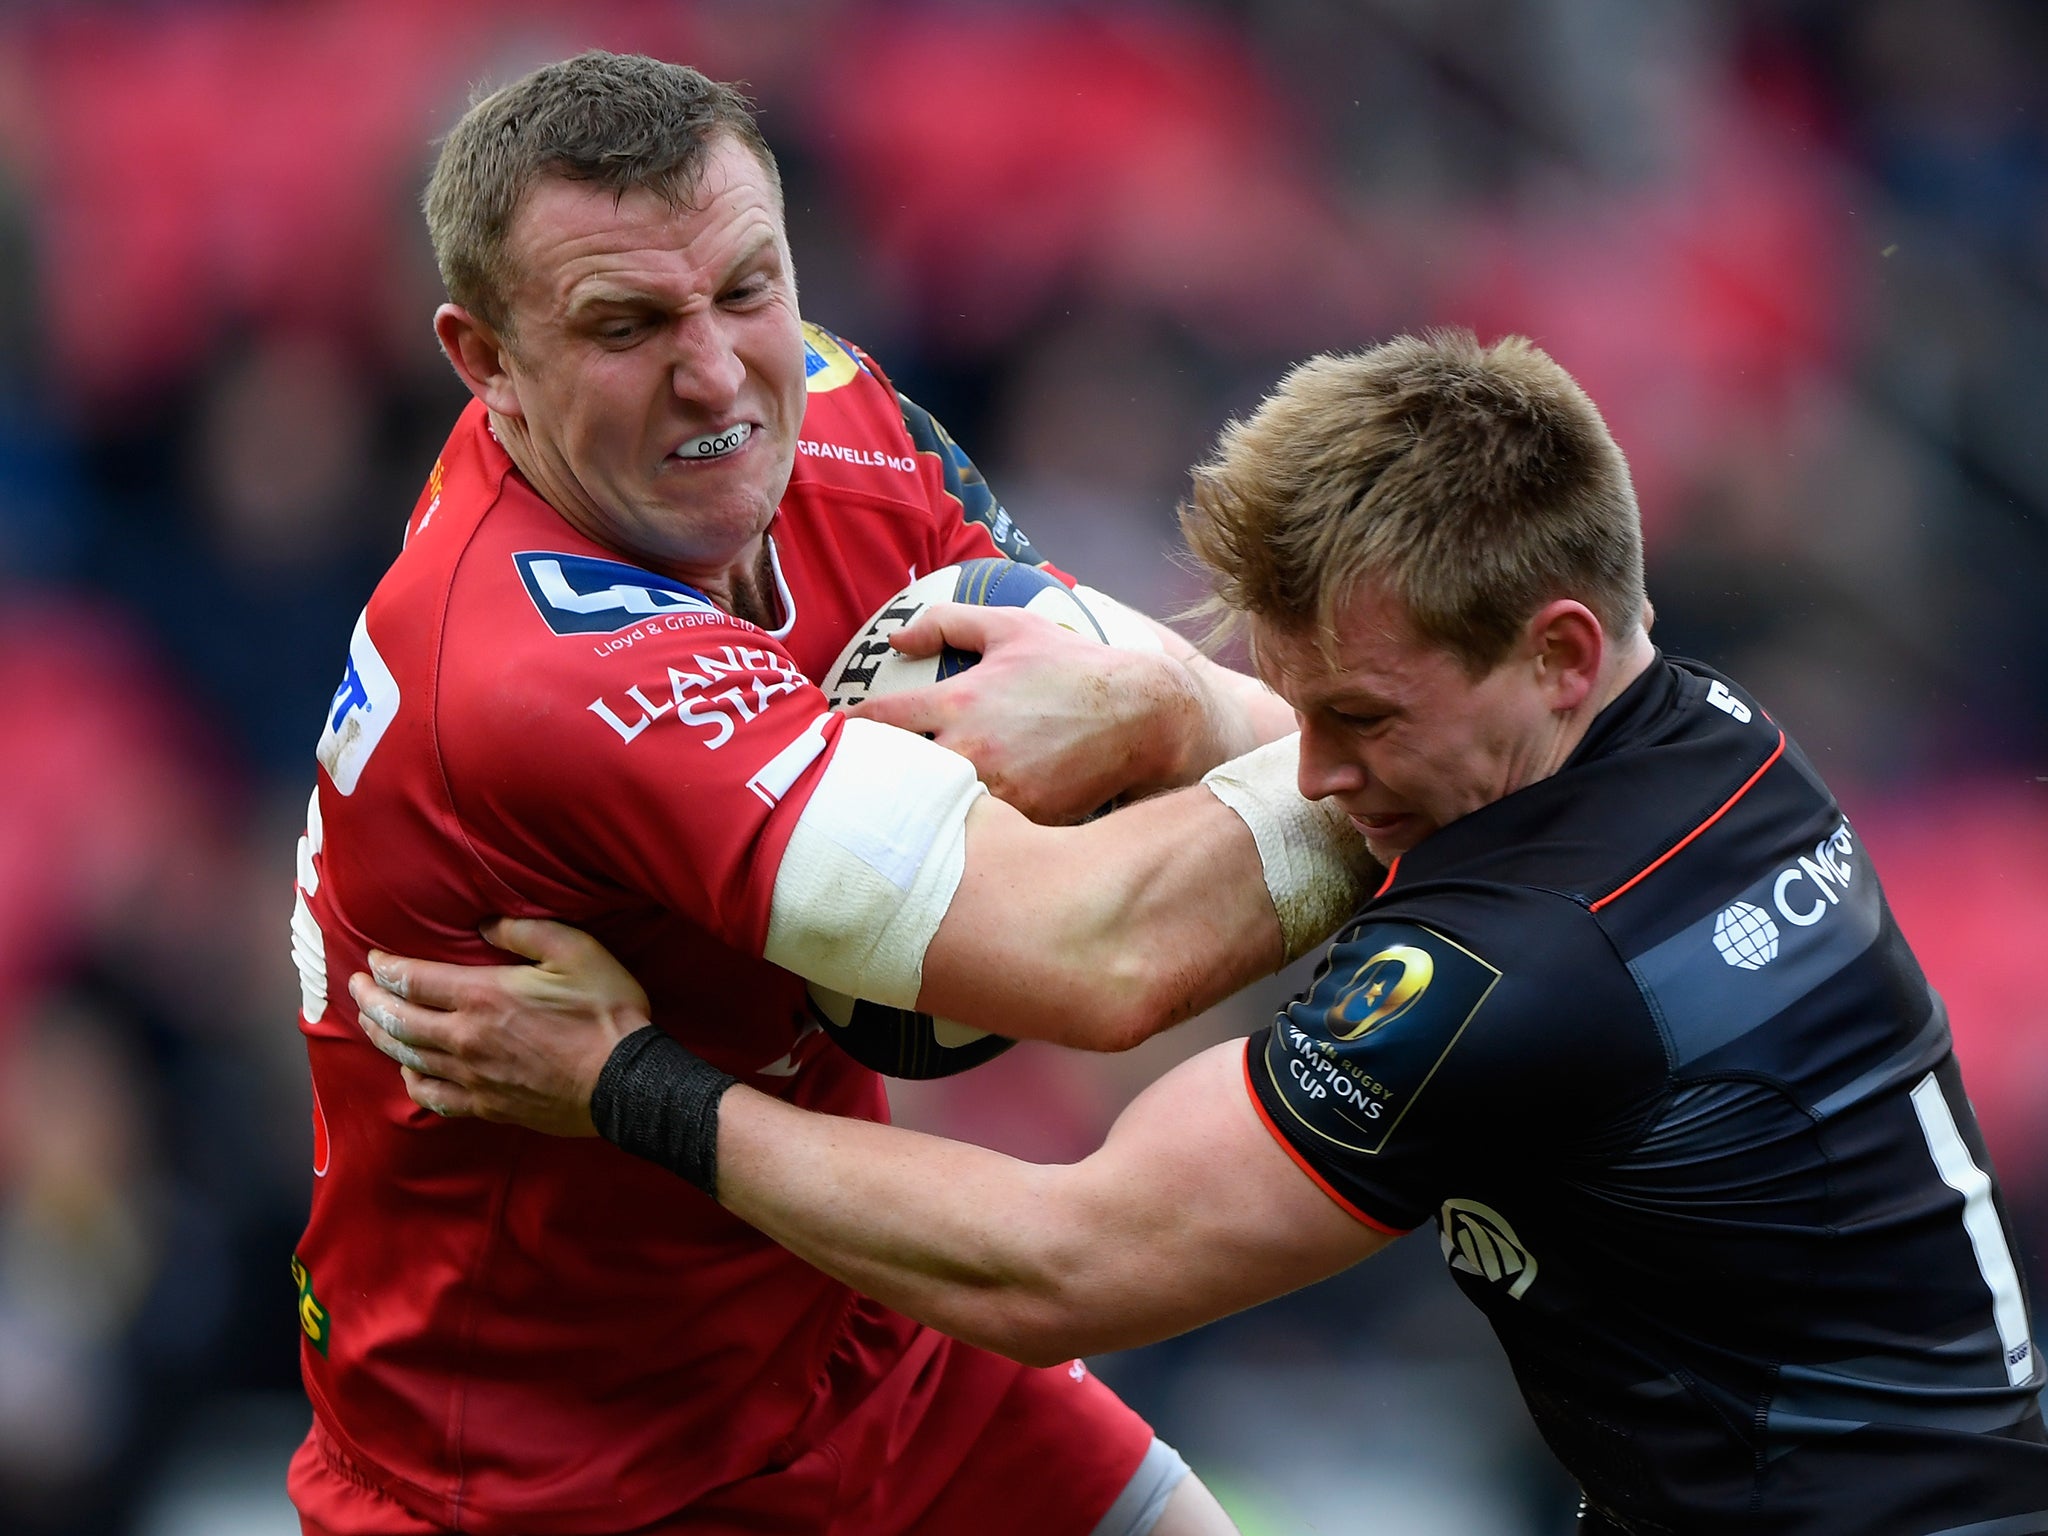 Hadleigh Parkes will make his first appearance for Wales after qualifying on residency grounds